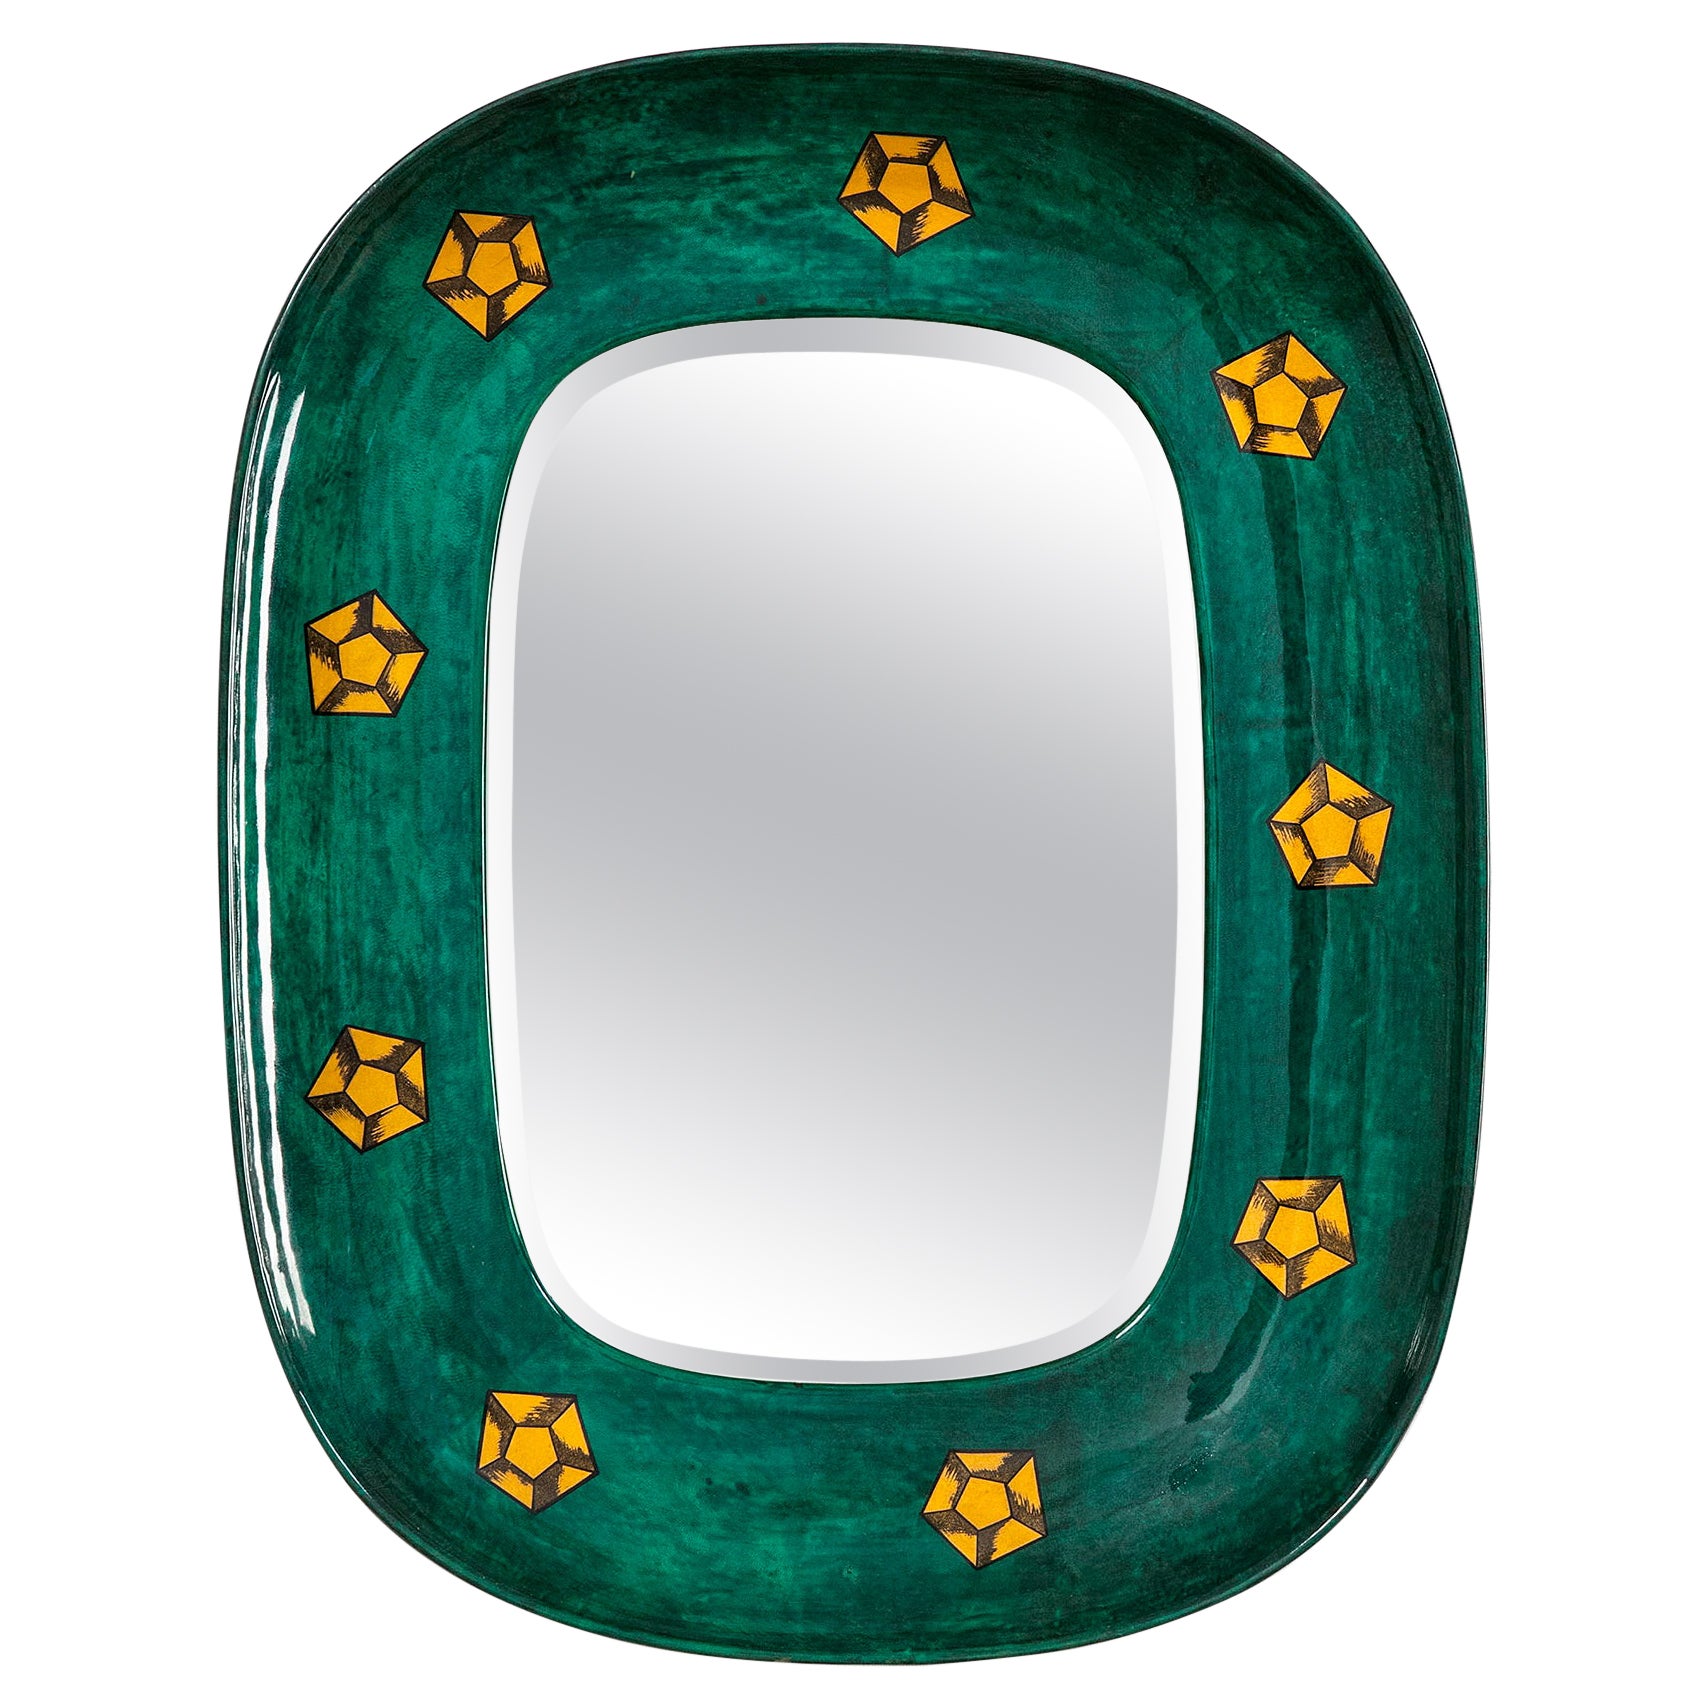 20th Century Aldo Tura Wall Mirror with Resin Coat, Wood and Paper Motifs, 1950s For Sale